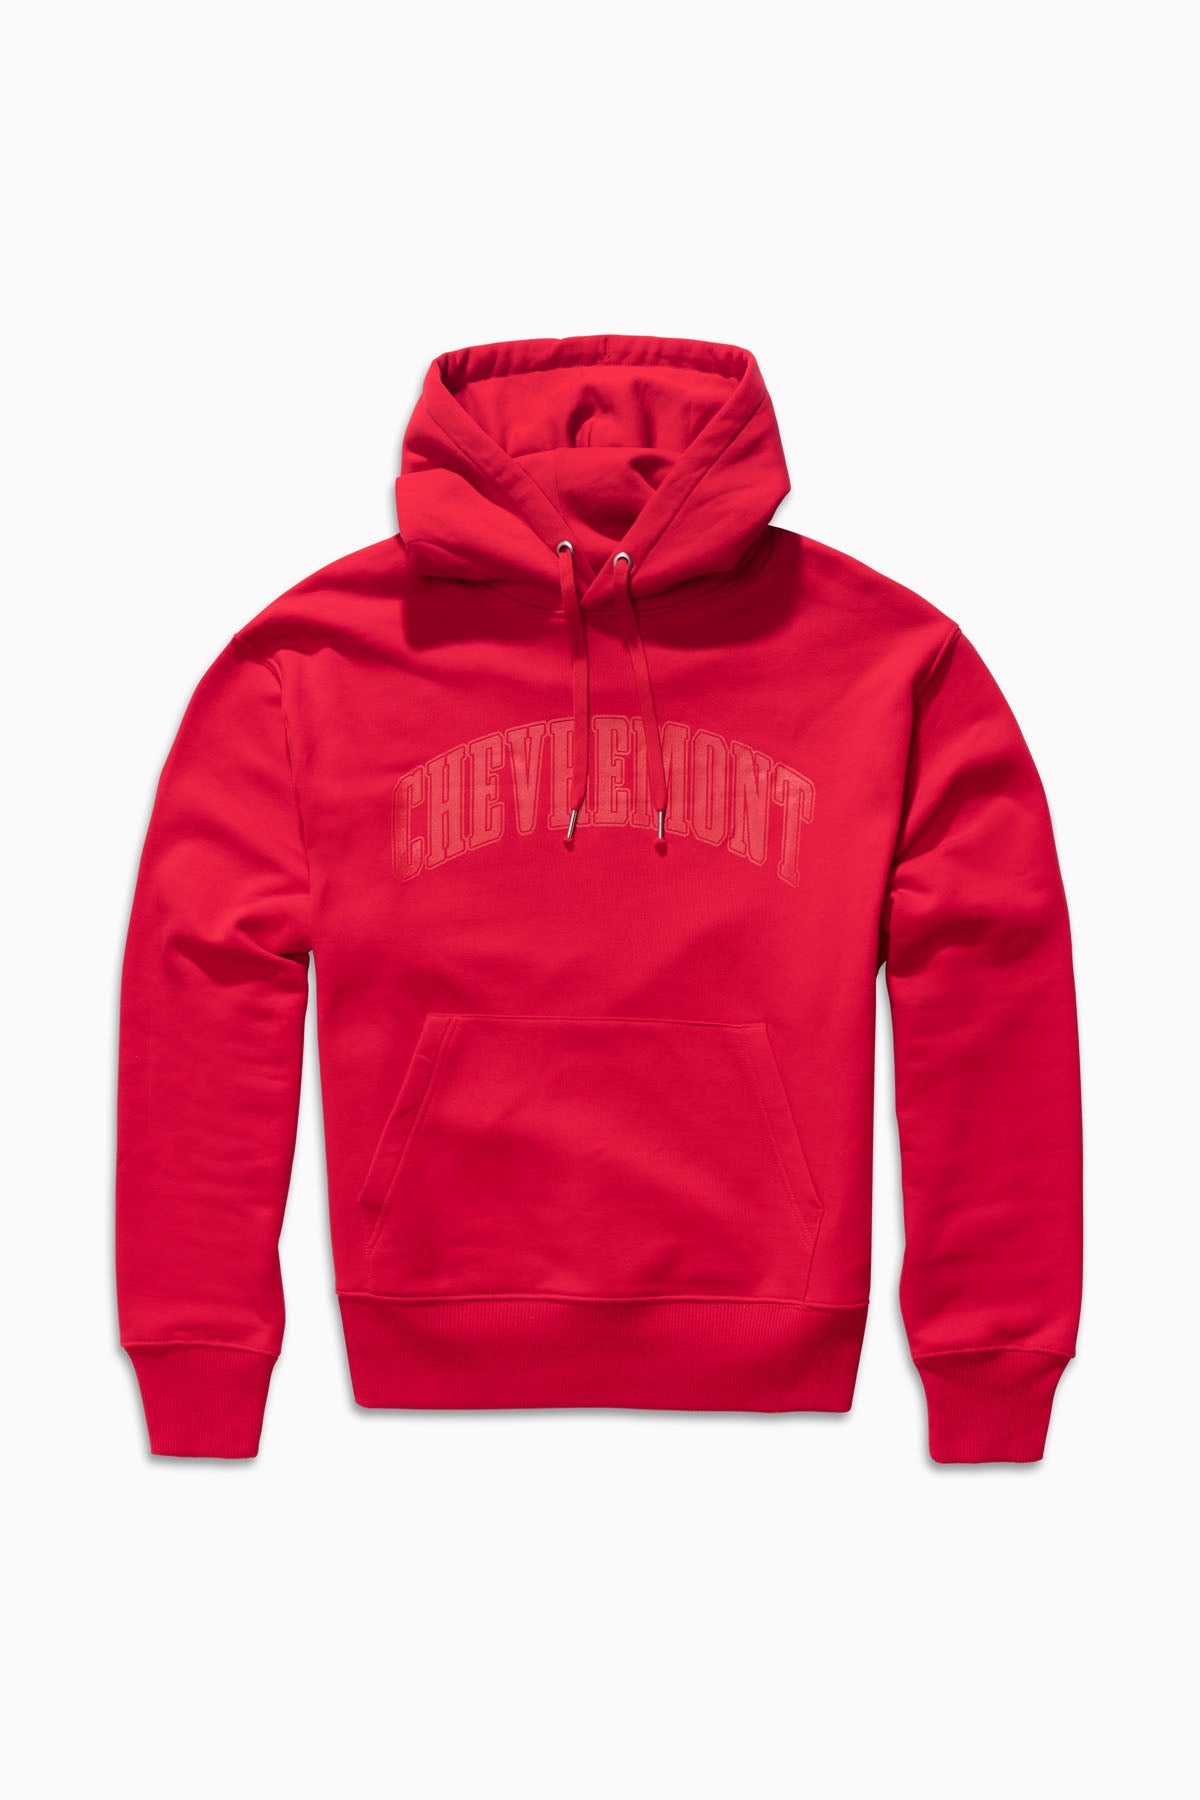 Oversized Hoodie Chevremont red on red